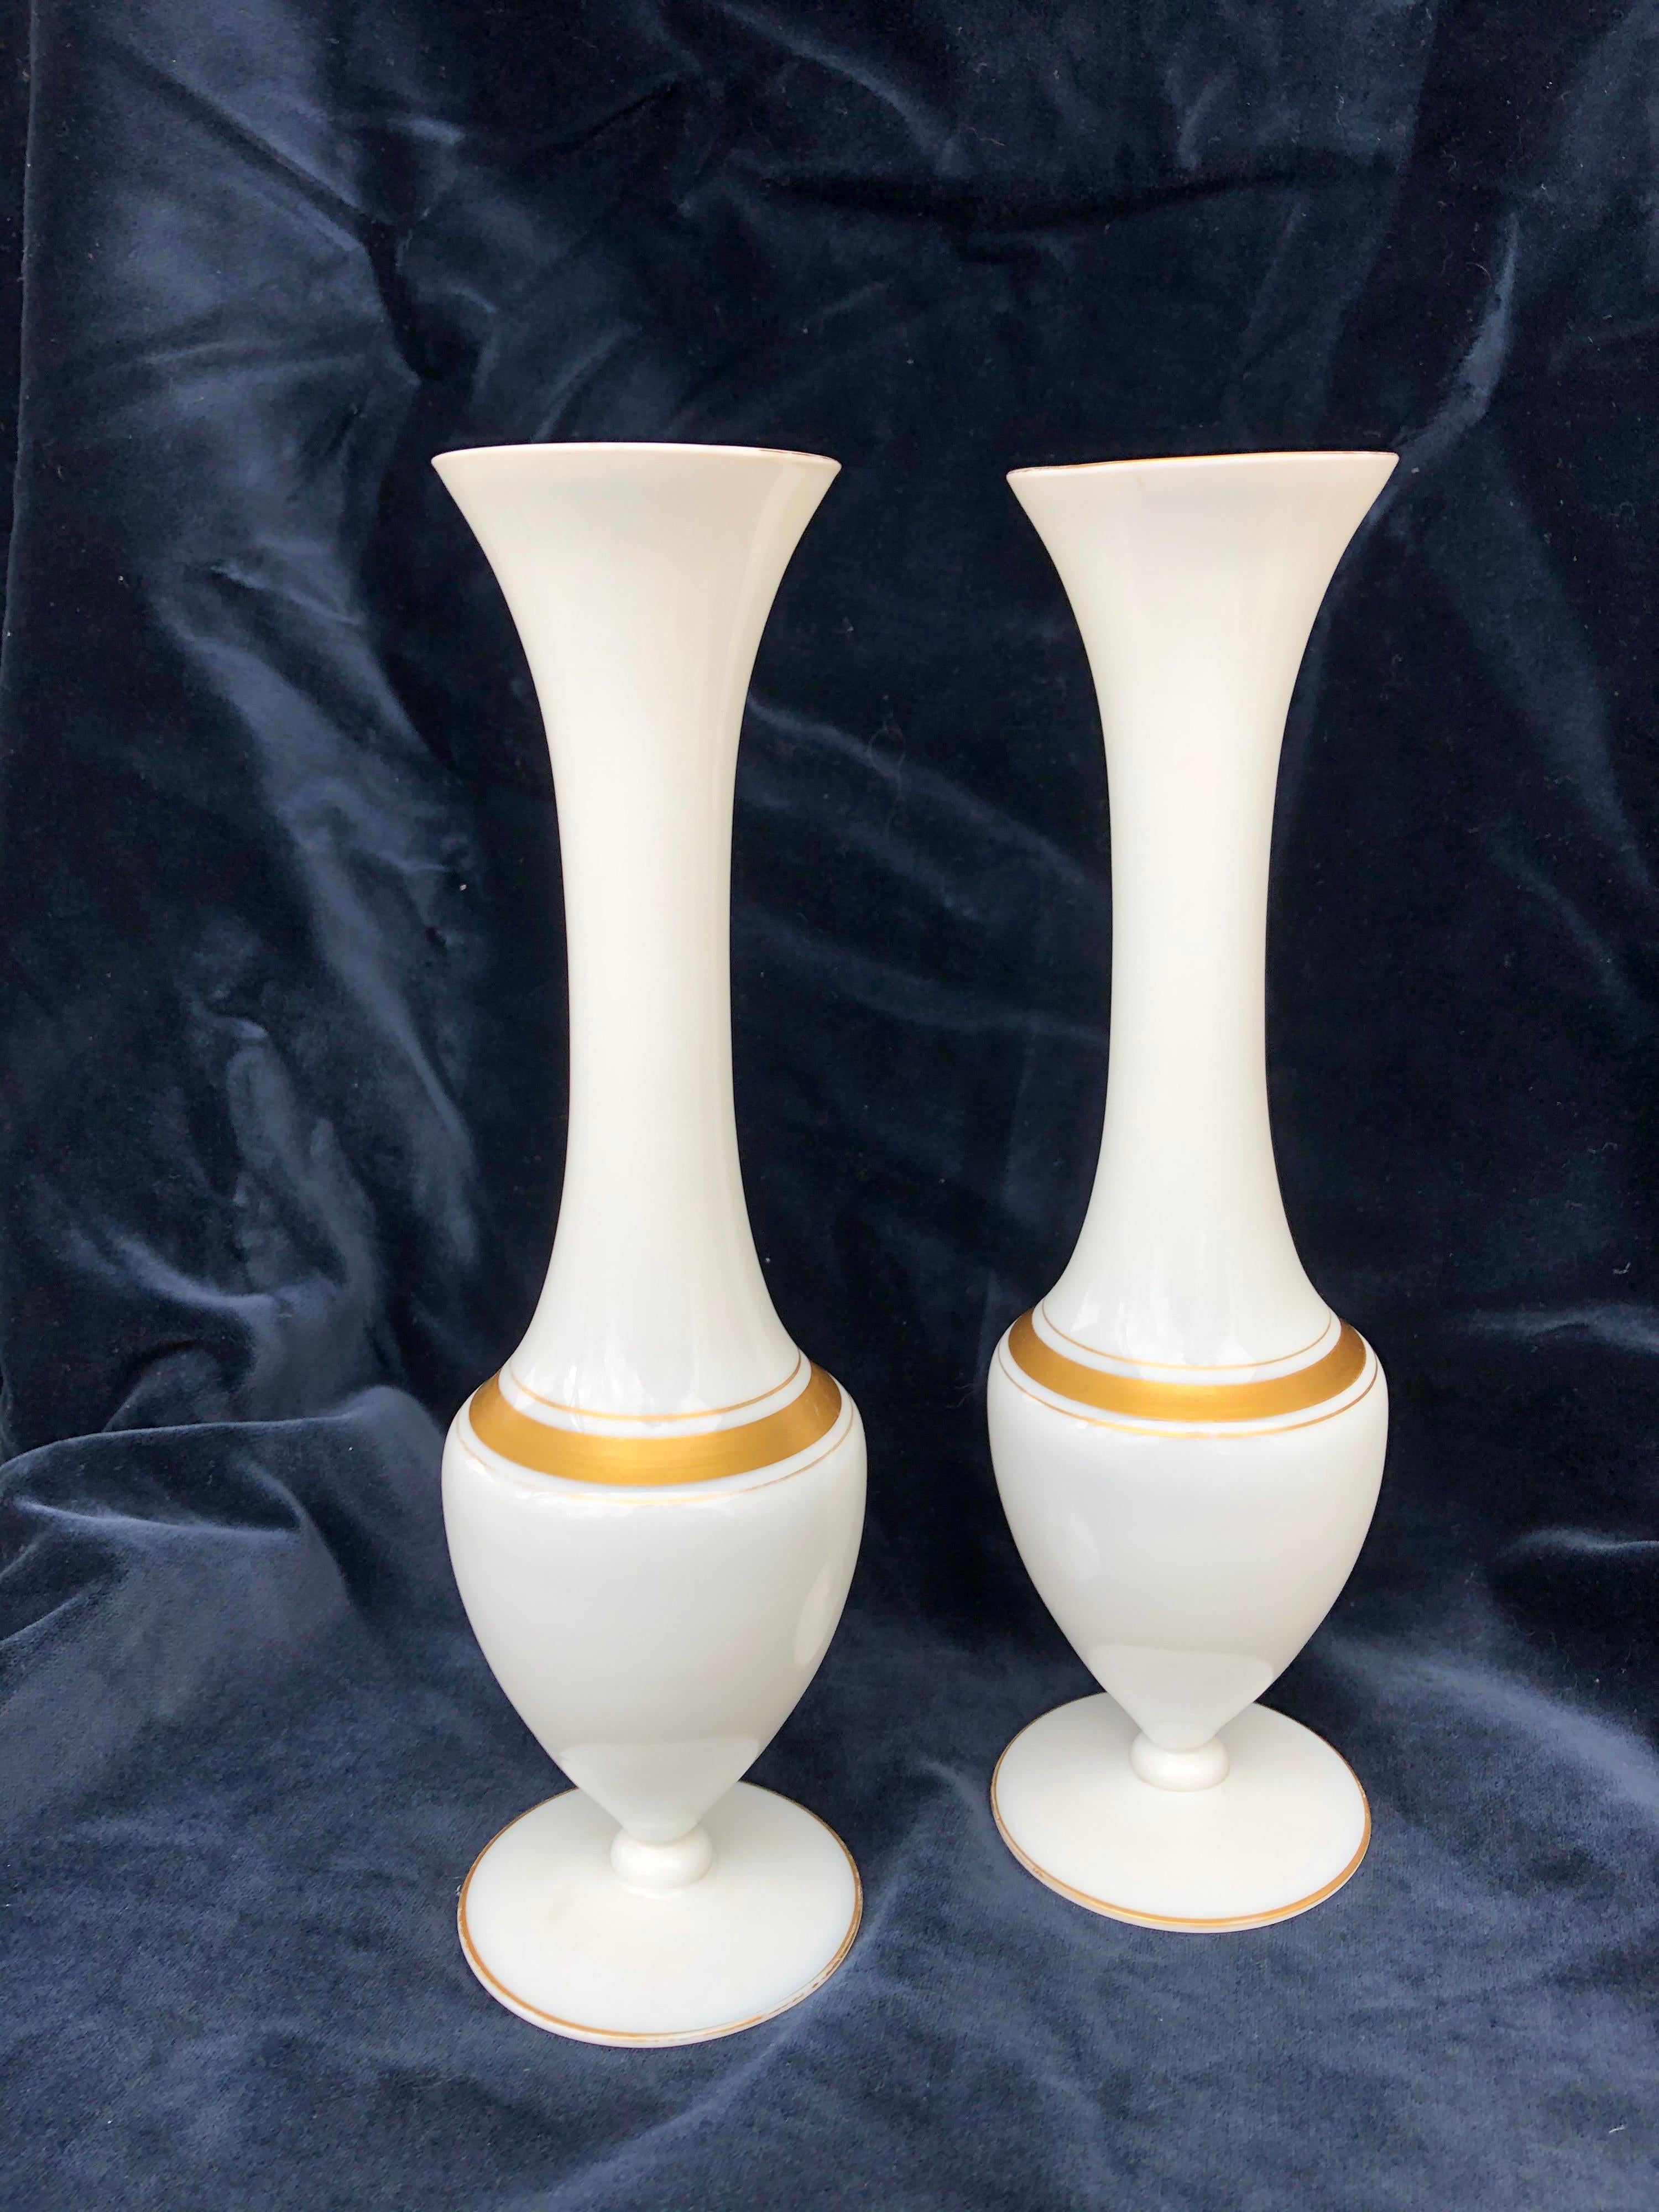 Pair of French gilt decorated opaline vases. Modern, but classical design. No imperfections.